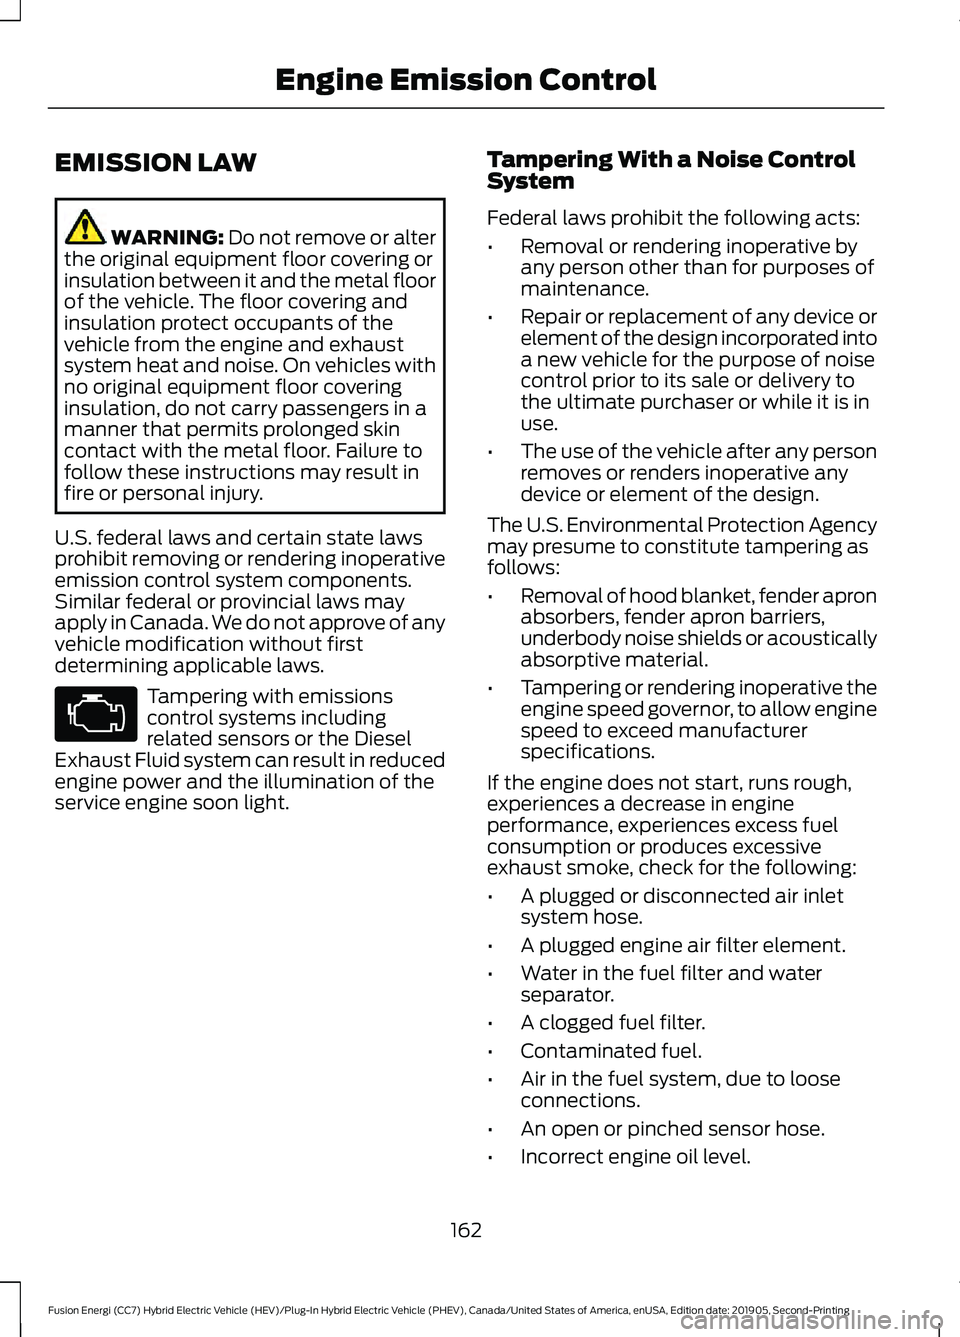 FORD FUSION ENERGI 2020  Owners Manual EMISSION LAW
WARNING: Do not remove or alter
the original equipment floor covering or
insulation between it and the metal floor
of the vehicle. The floor covering and
insulation protect occupants of t